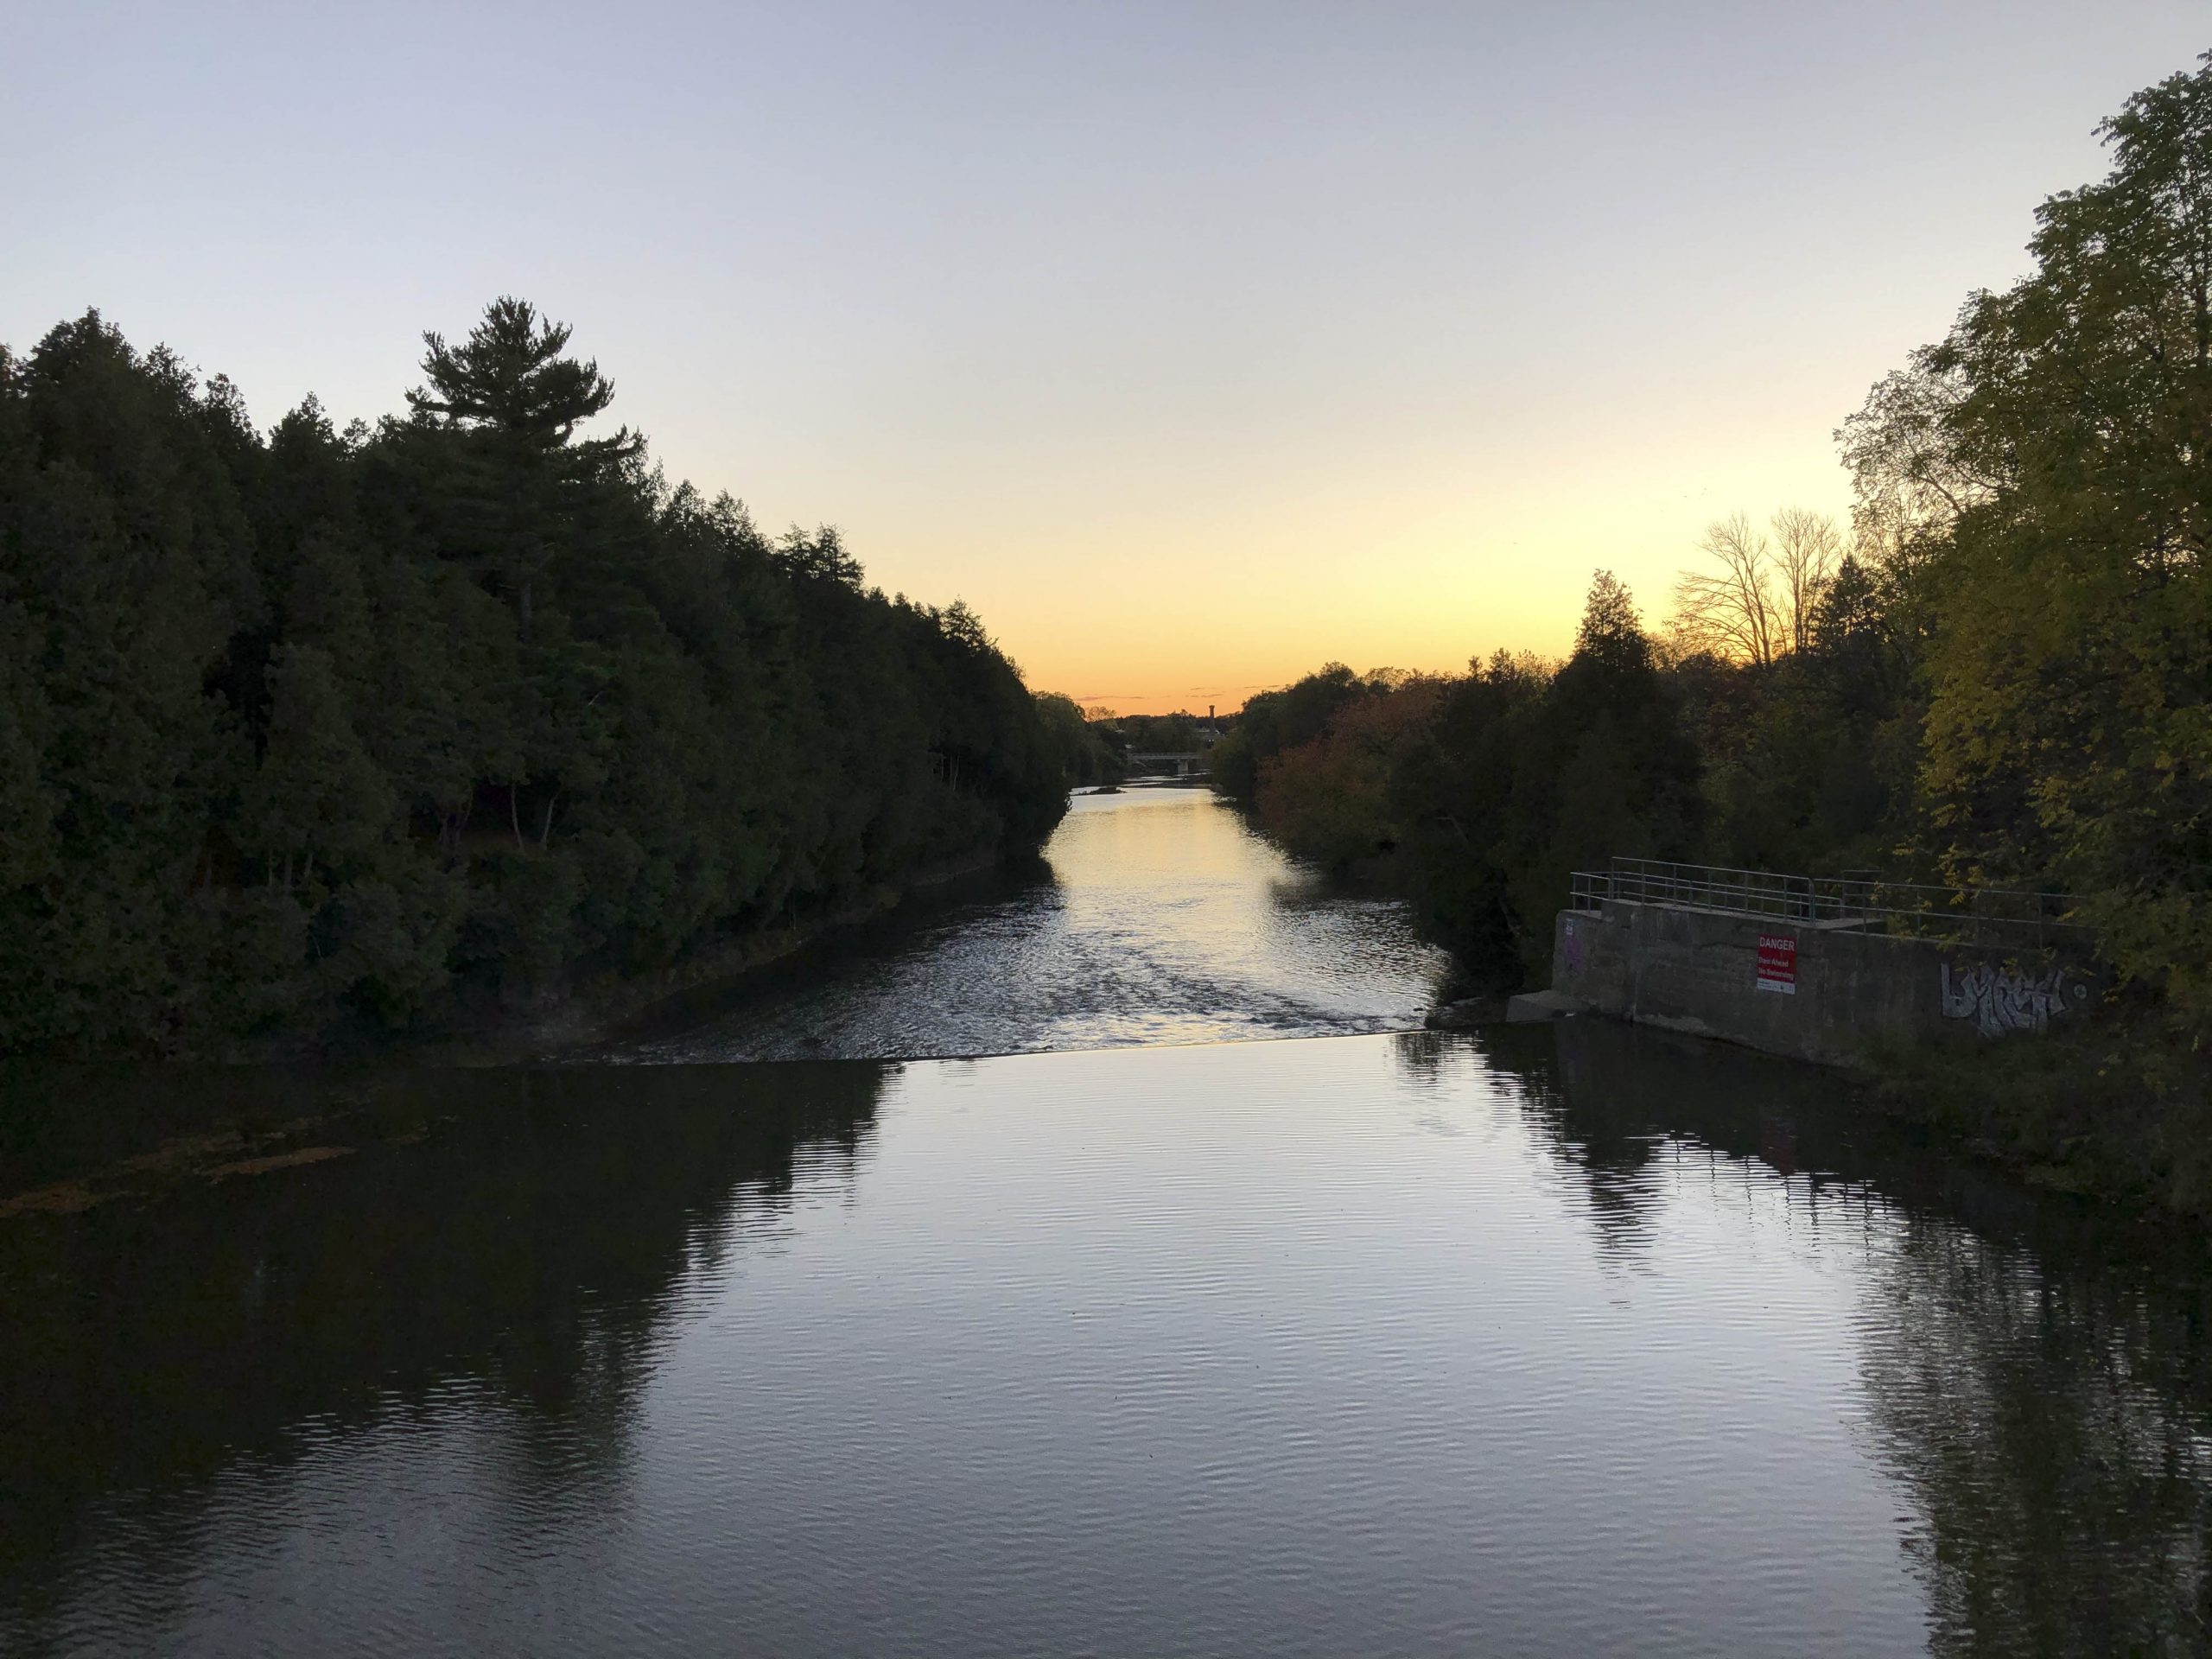 The Grand River at sunset.